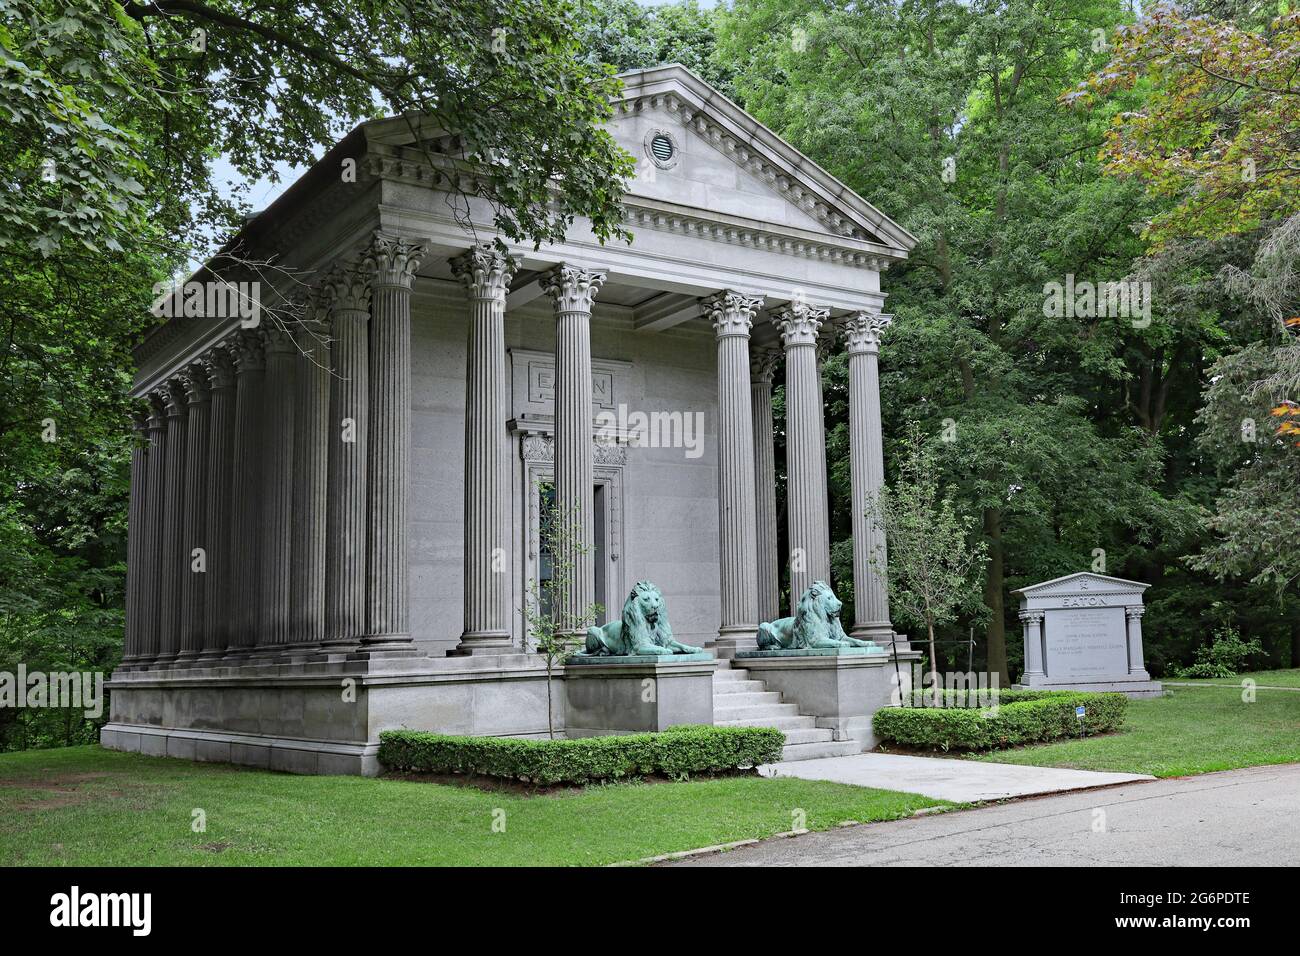 Grand classical style mausoleum of a wealthy family, guarded by lions, in  Mount Pleasant Cemetery, Toronto Stock Photo